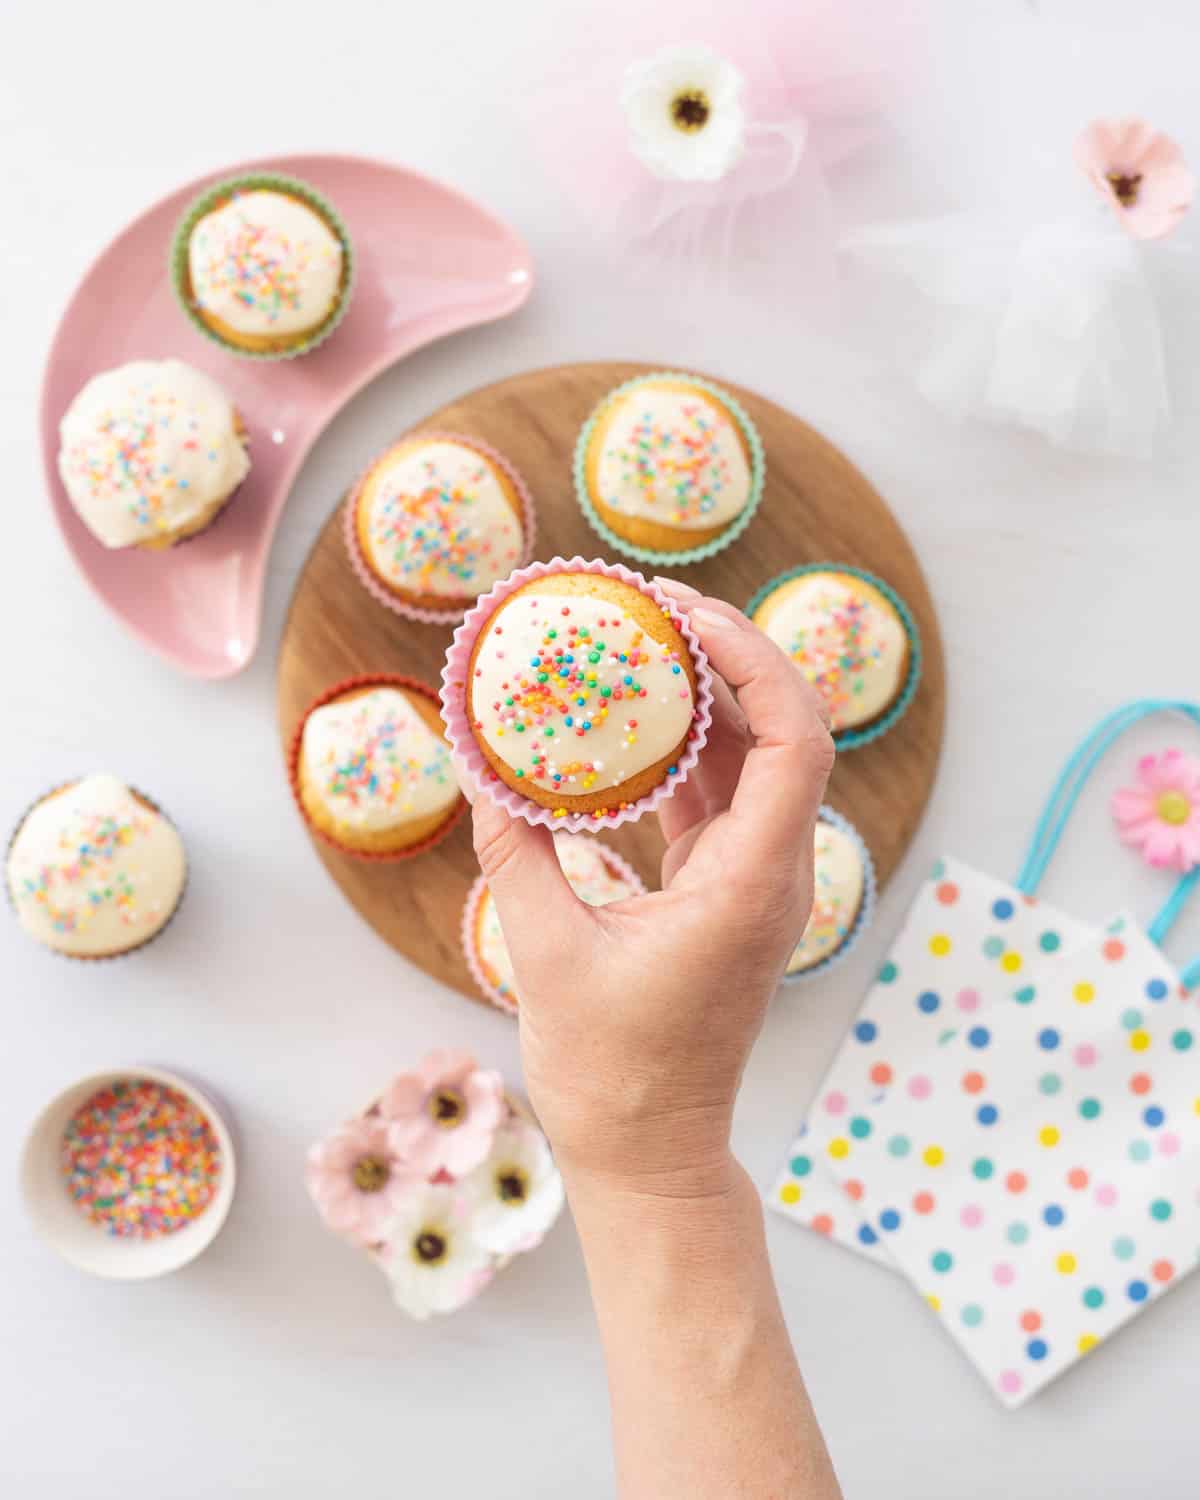 A cupcake in a pink cupcake case decorated with white glaze and rainbow sprinkles being held above a wooden board of more cupcakes. 